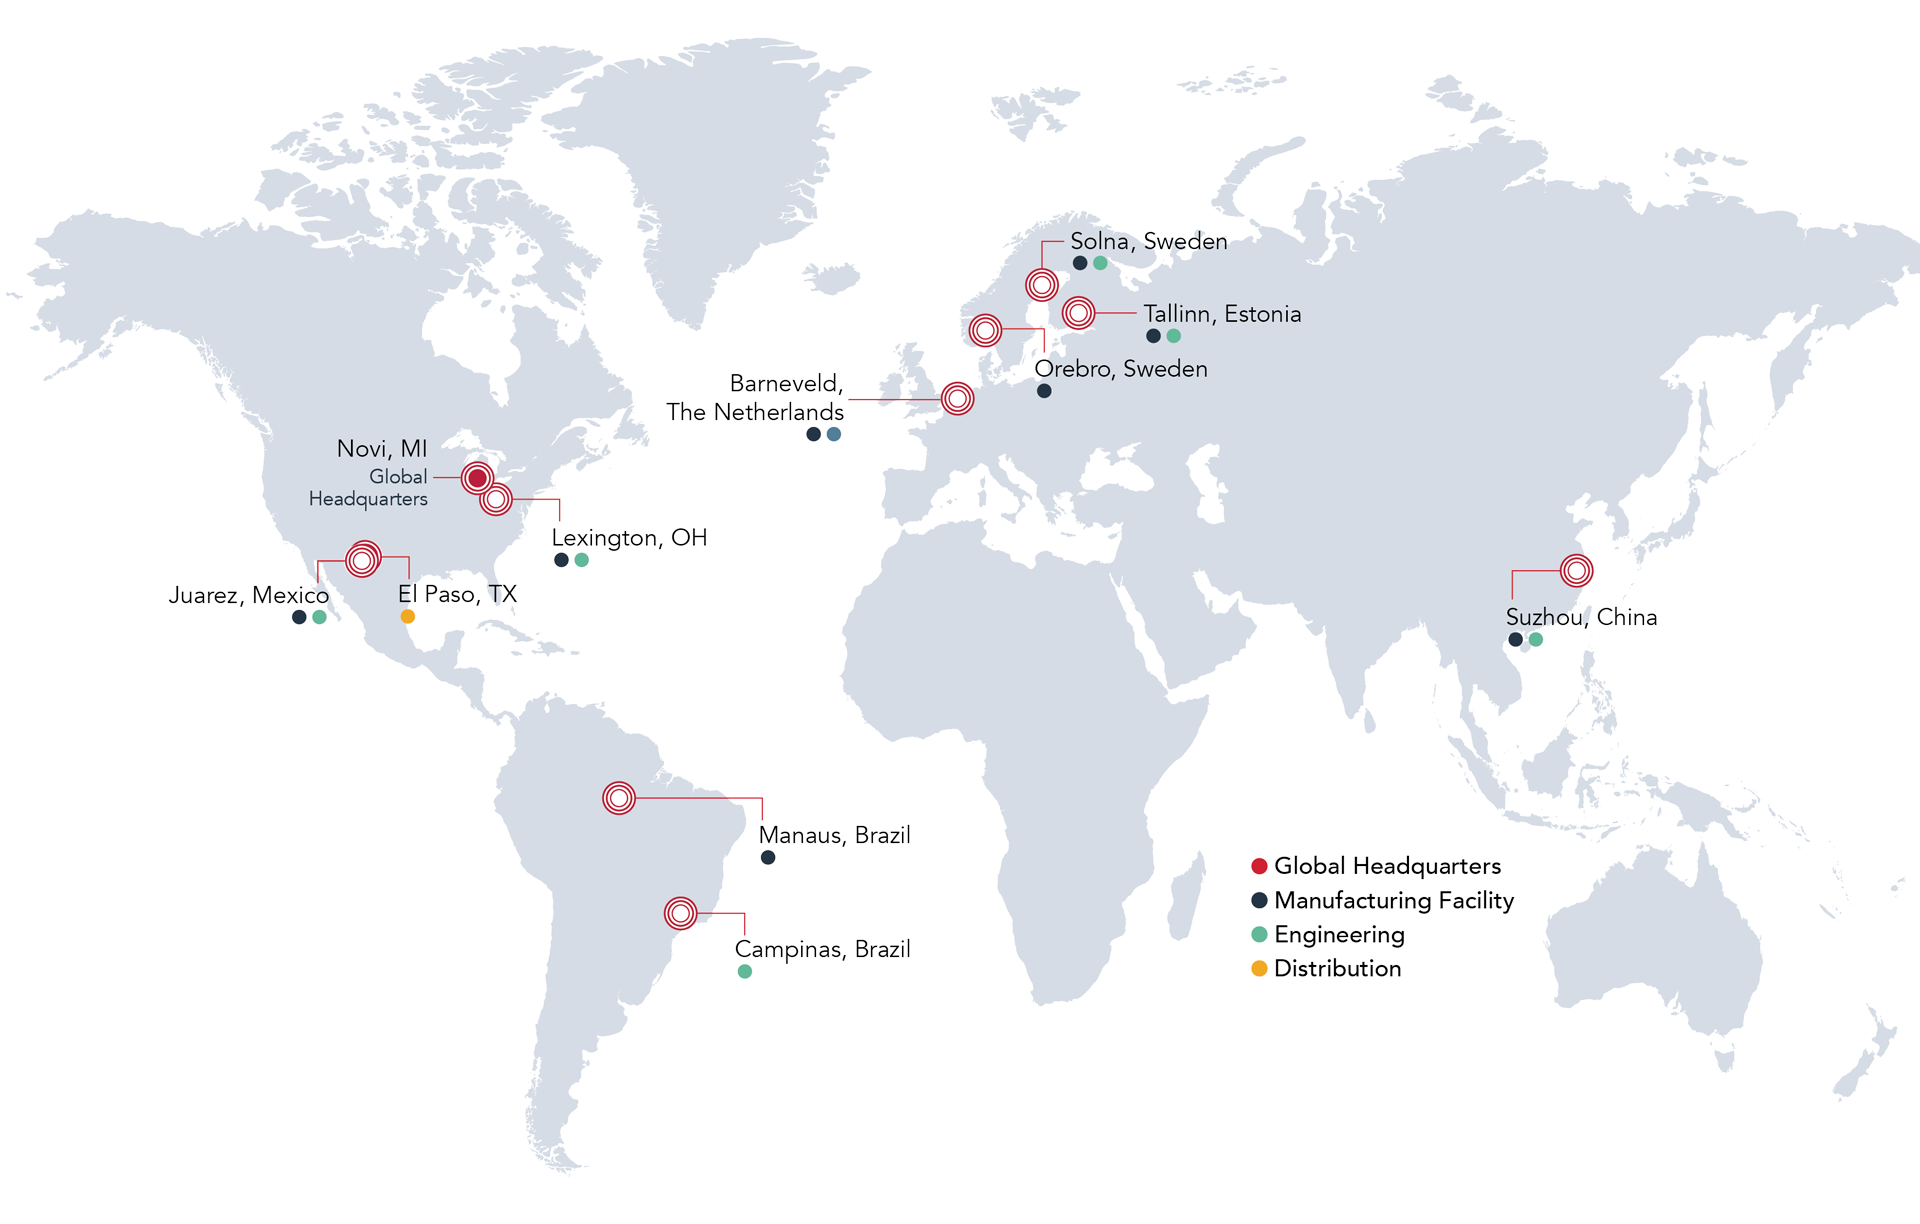 Global Location Map showing points for Headquarters, Manufacturing Facility, Engineering, and Distribution